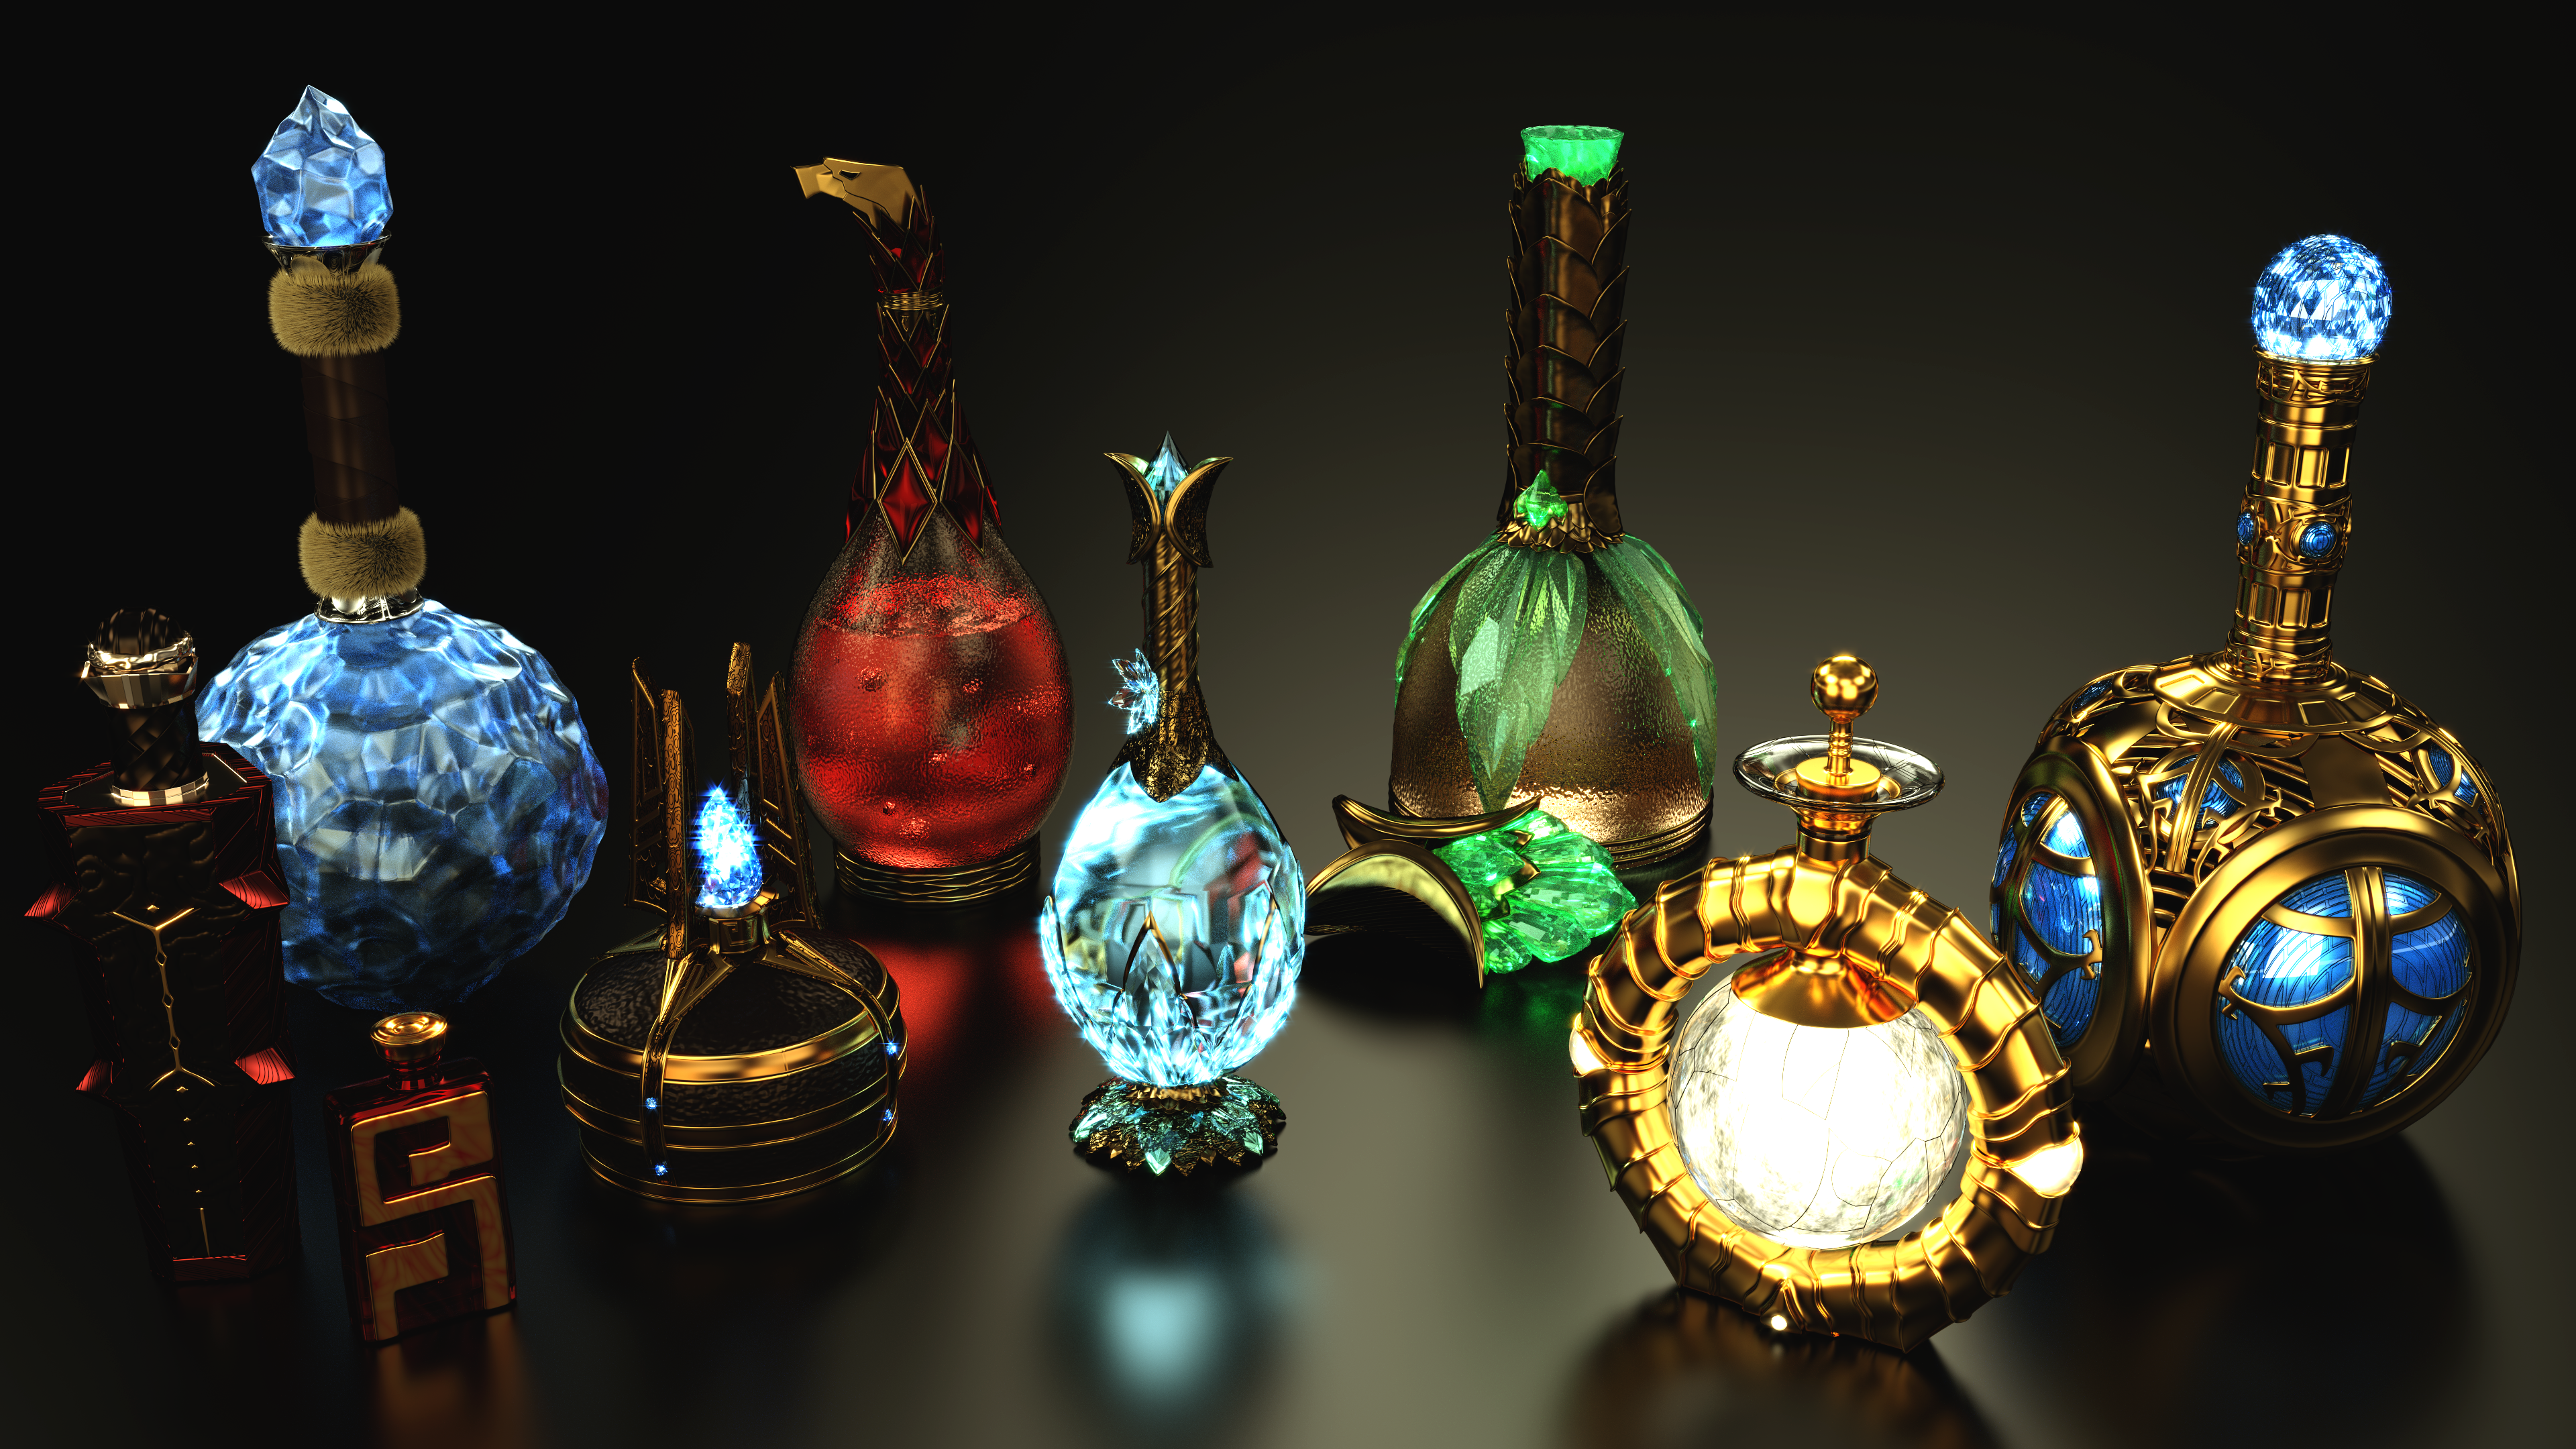 skyrim_potions_2nd_set___tes_5_by_etrelley-d962aqm.png